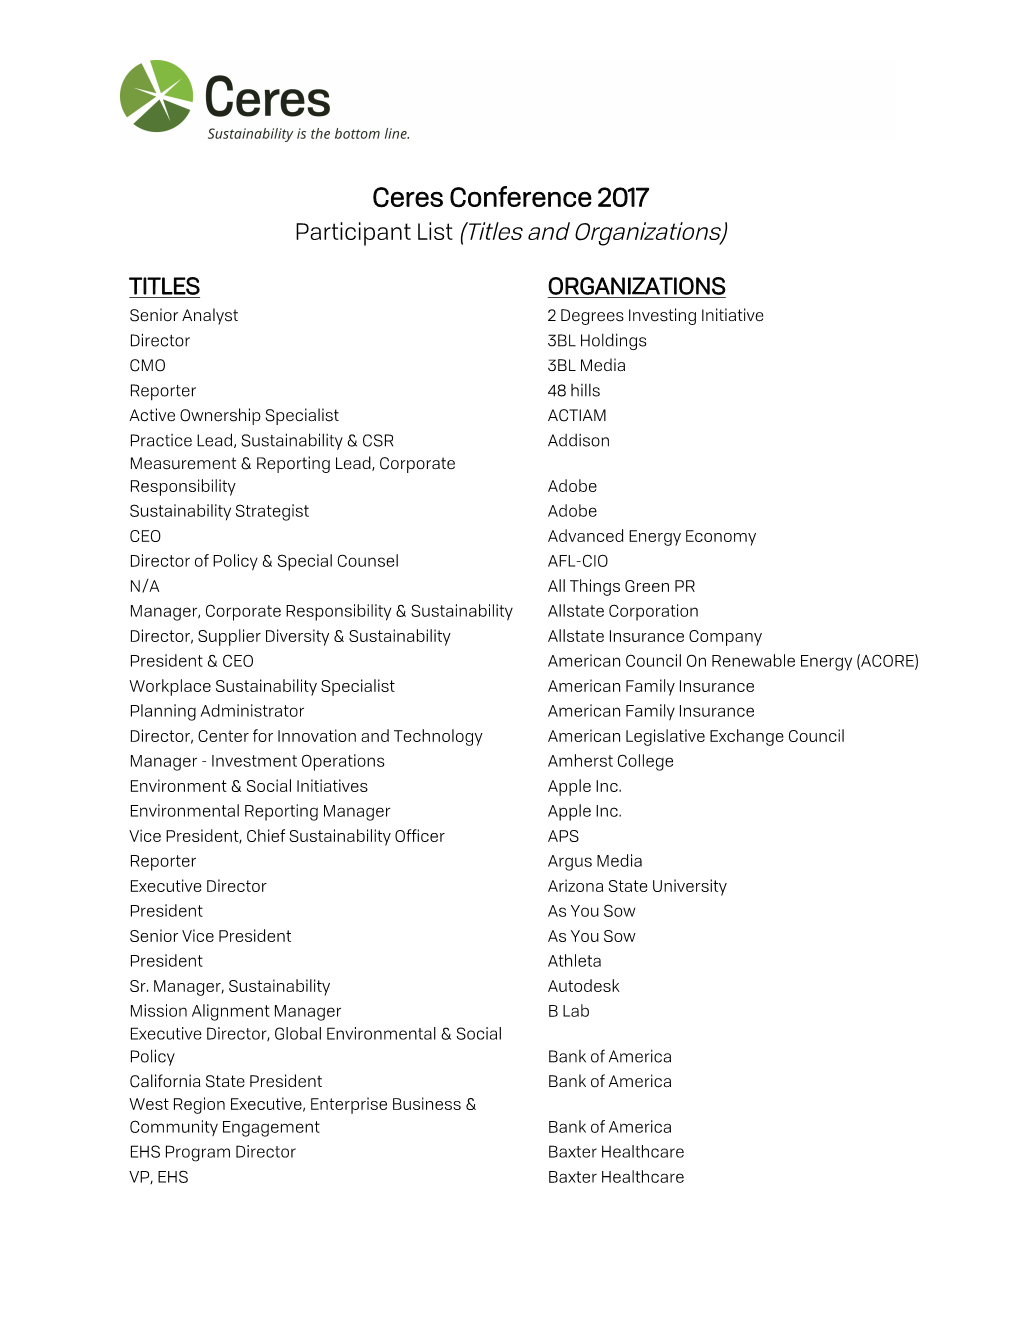 Ceres Conference 2017 Participant List (Titles and Organizations)